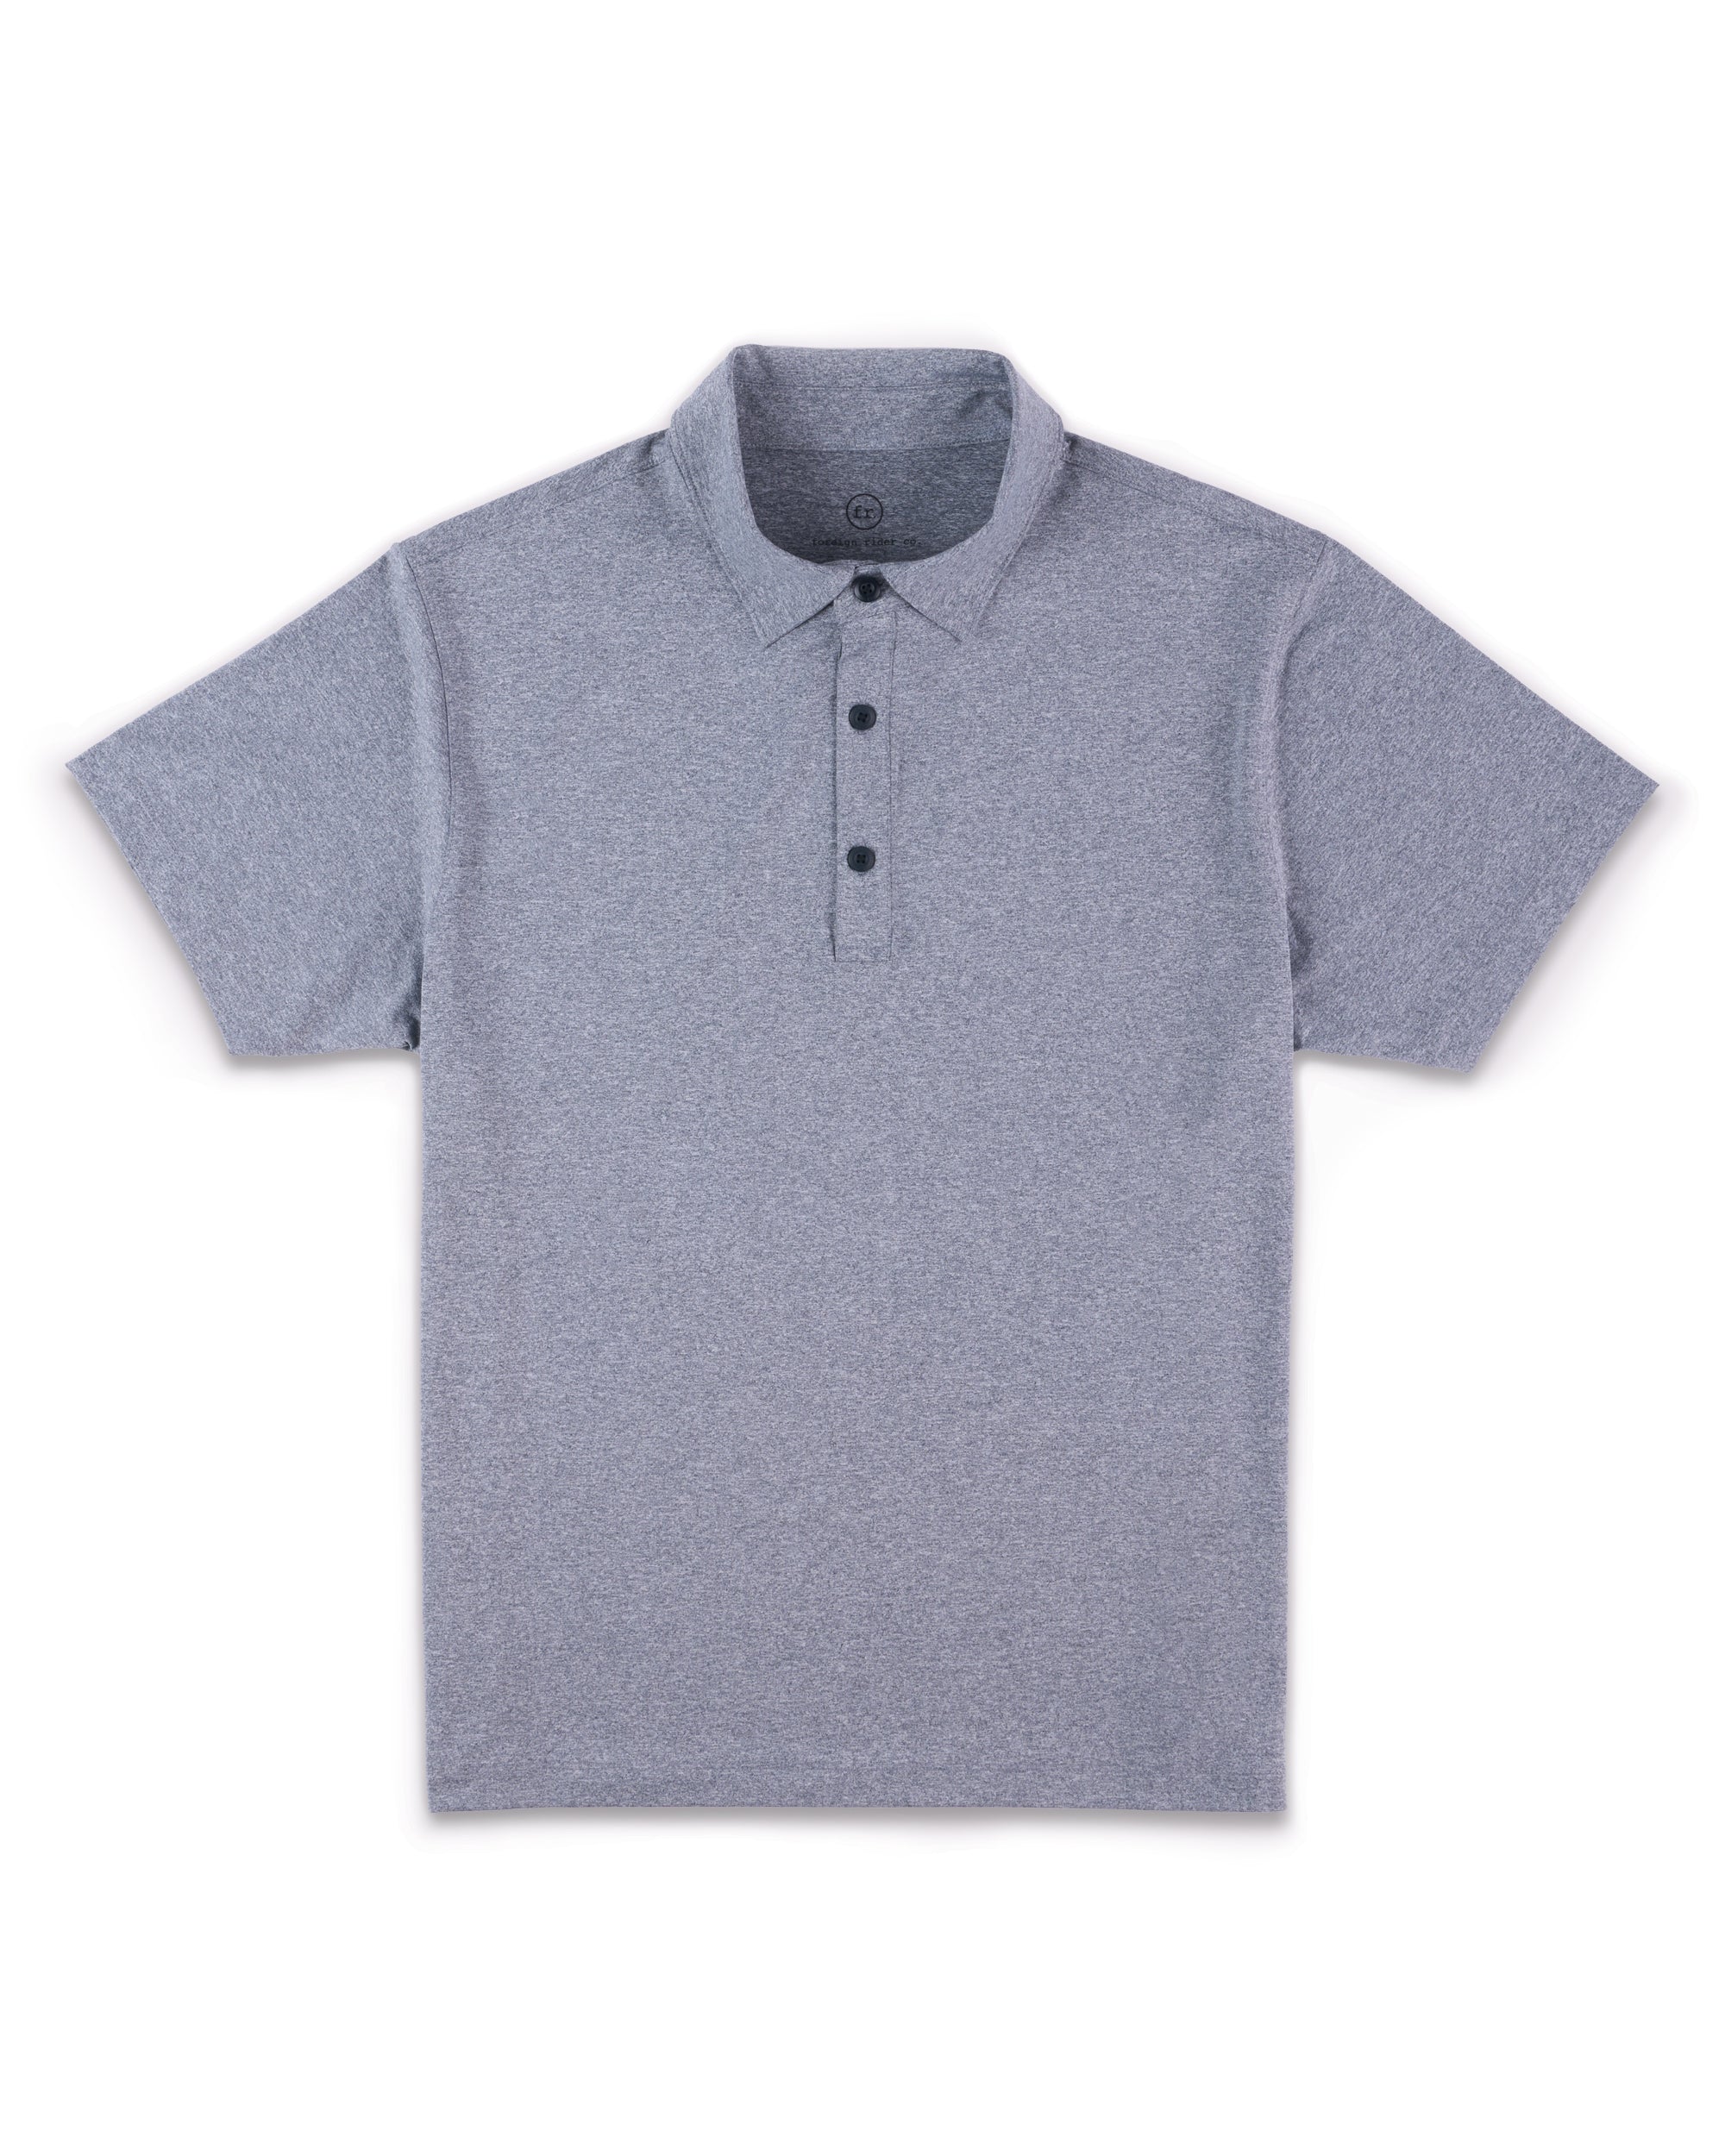 Performance Polo Grey - Foreign Rider Co.